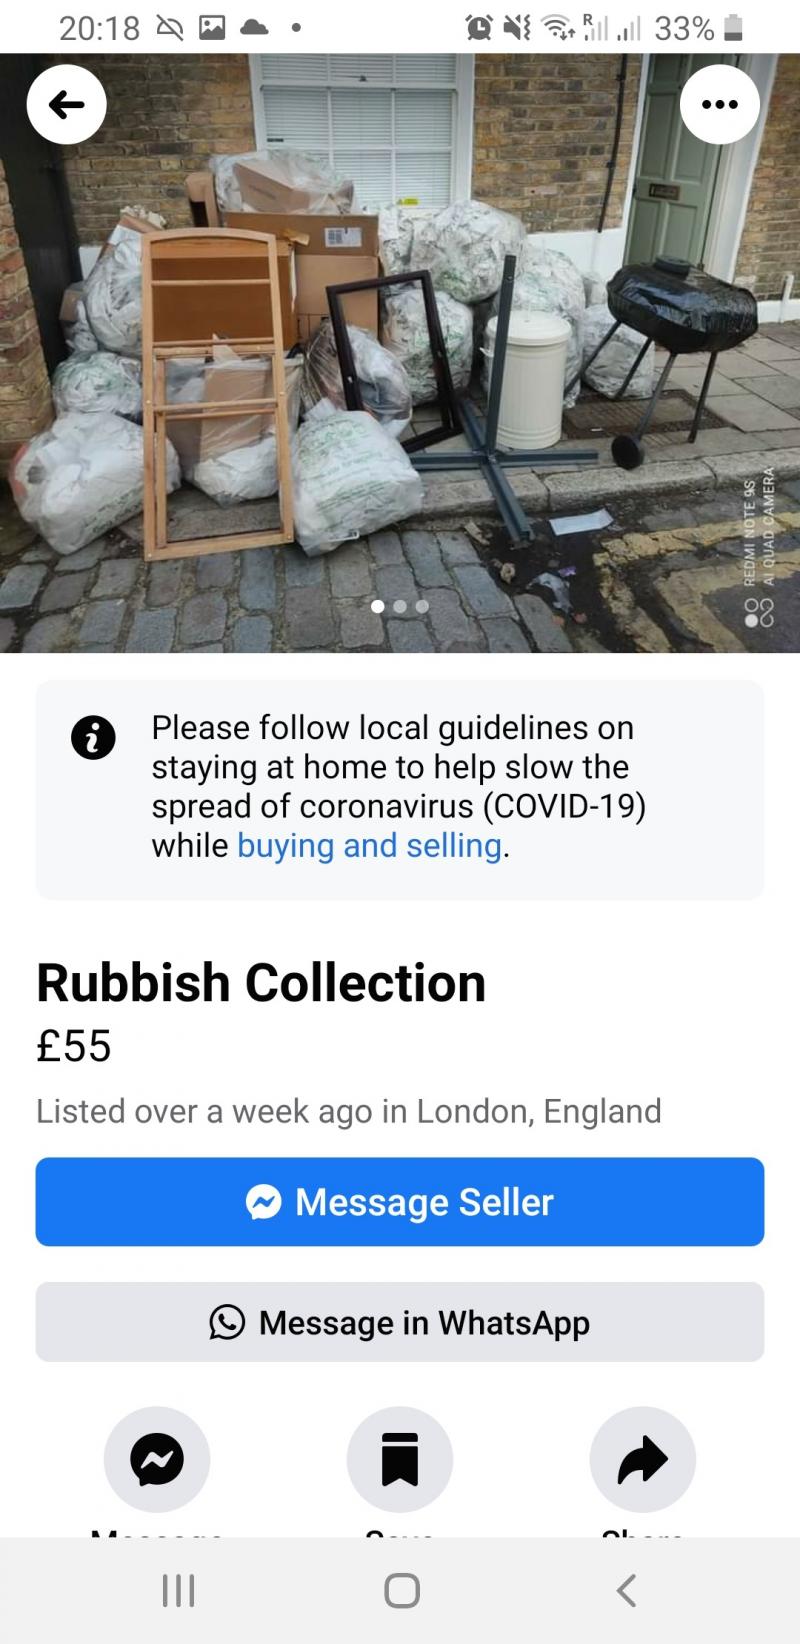 Why you should pay for collecting rubbish? 🙄